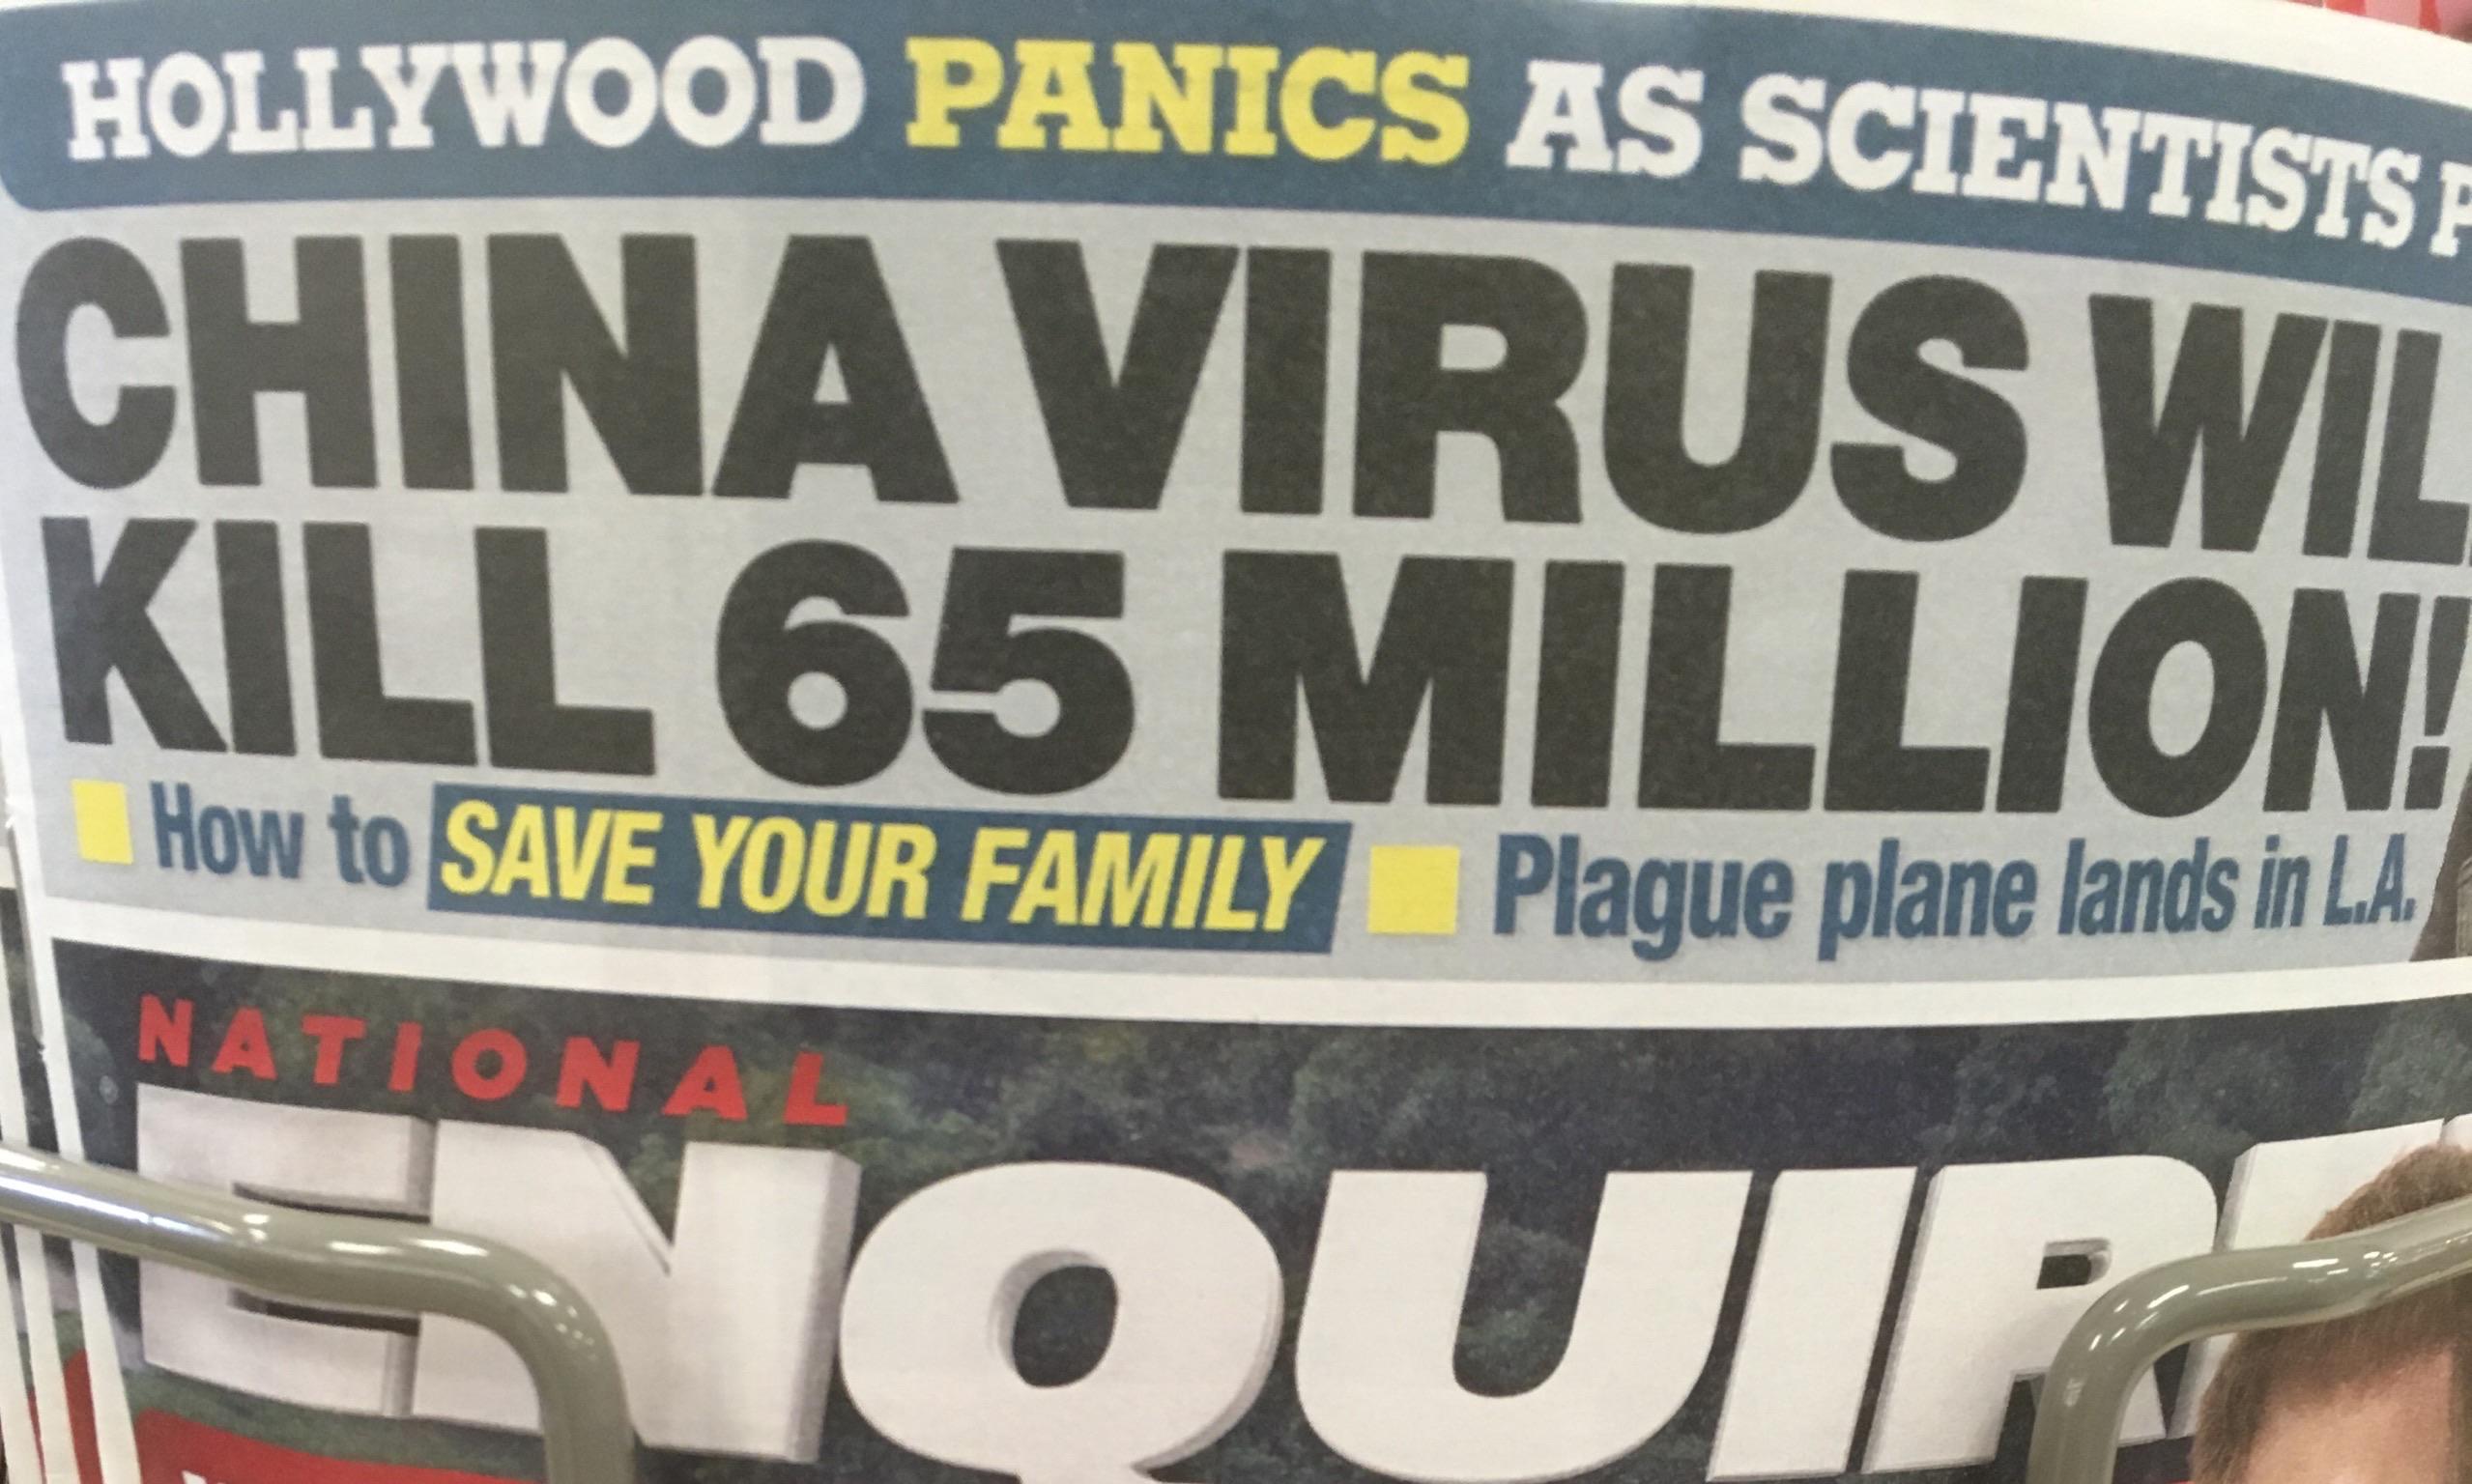 then came bronson - Hollywood Panics As Scientists China Virus Wil Kill 65 Million! How to Save Your Family Plague plane lands in La National Avquip